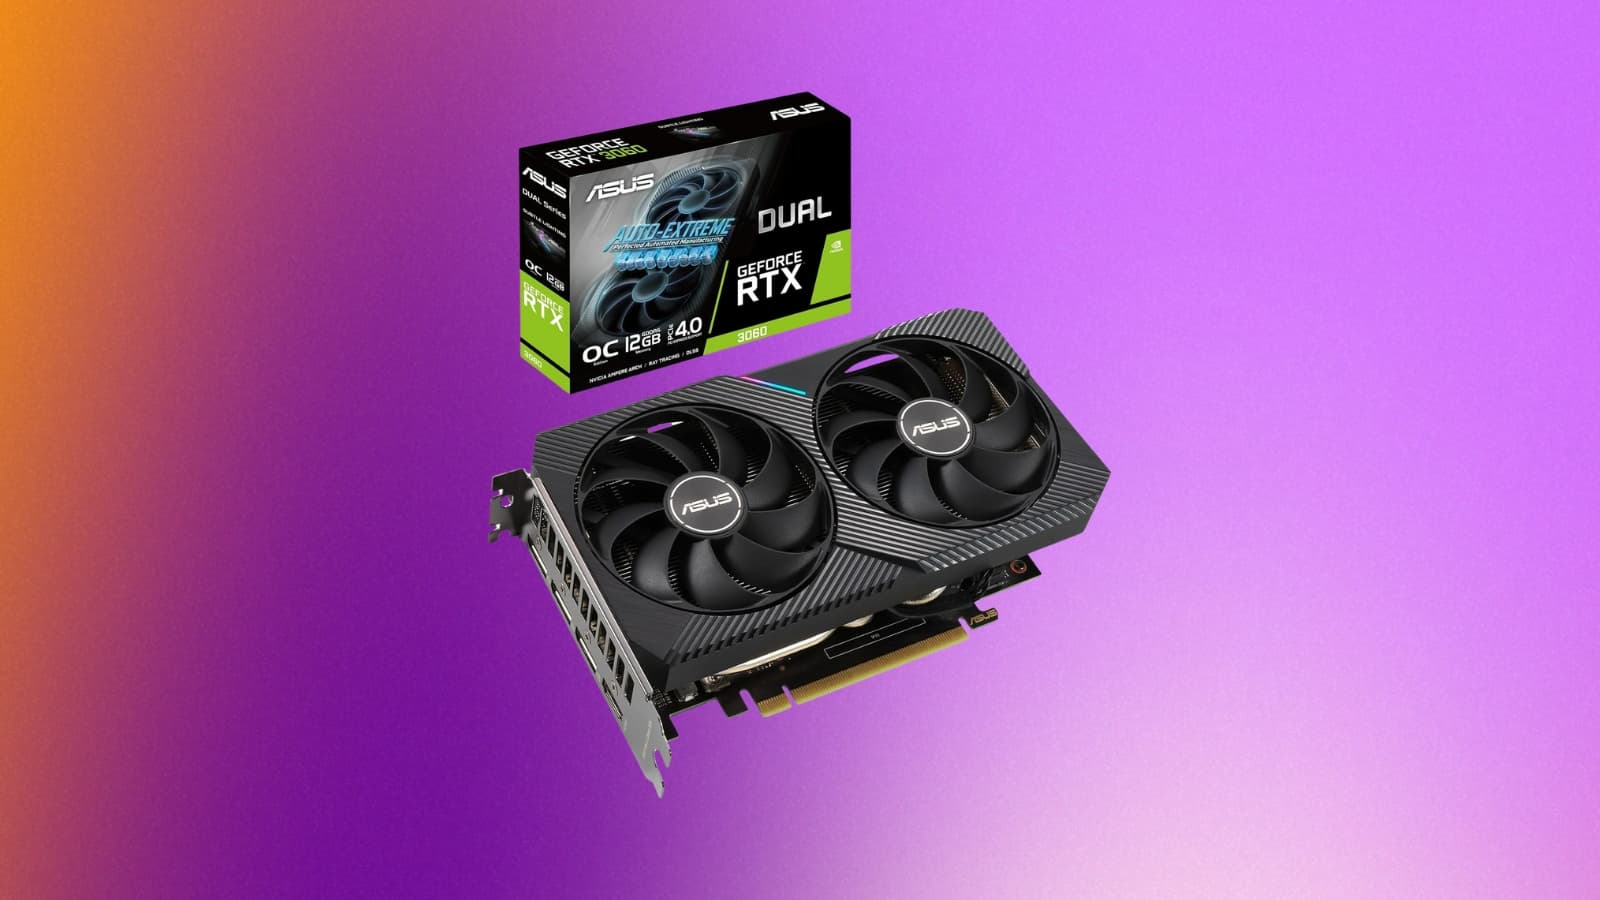 crazy price for this high quality graphics card